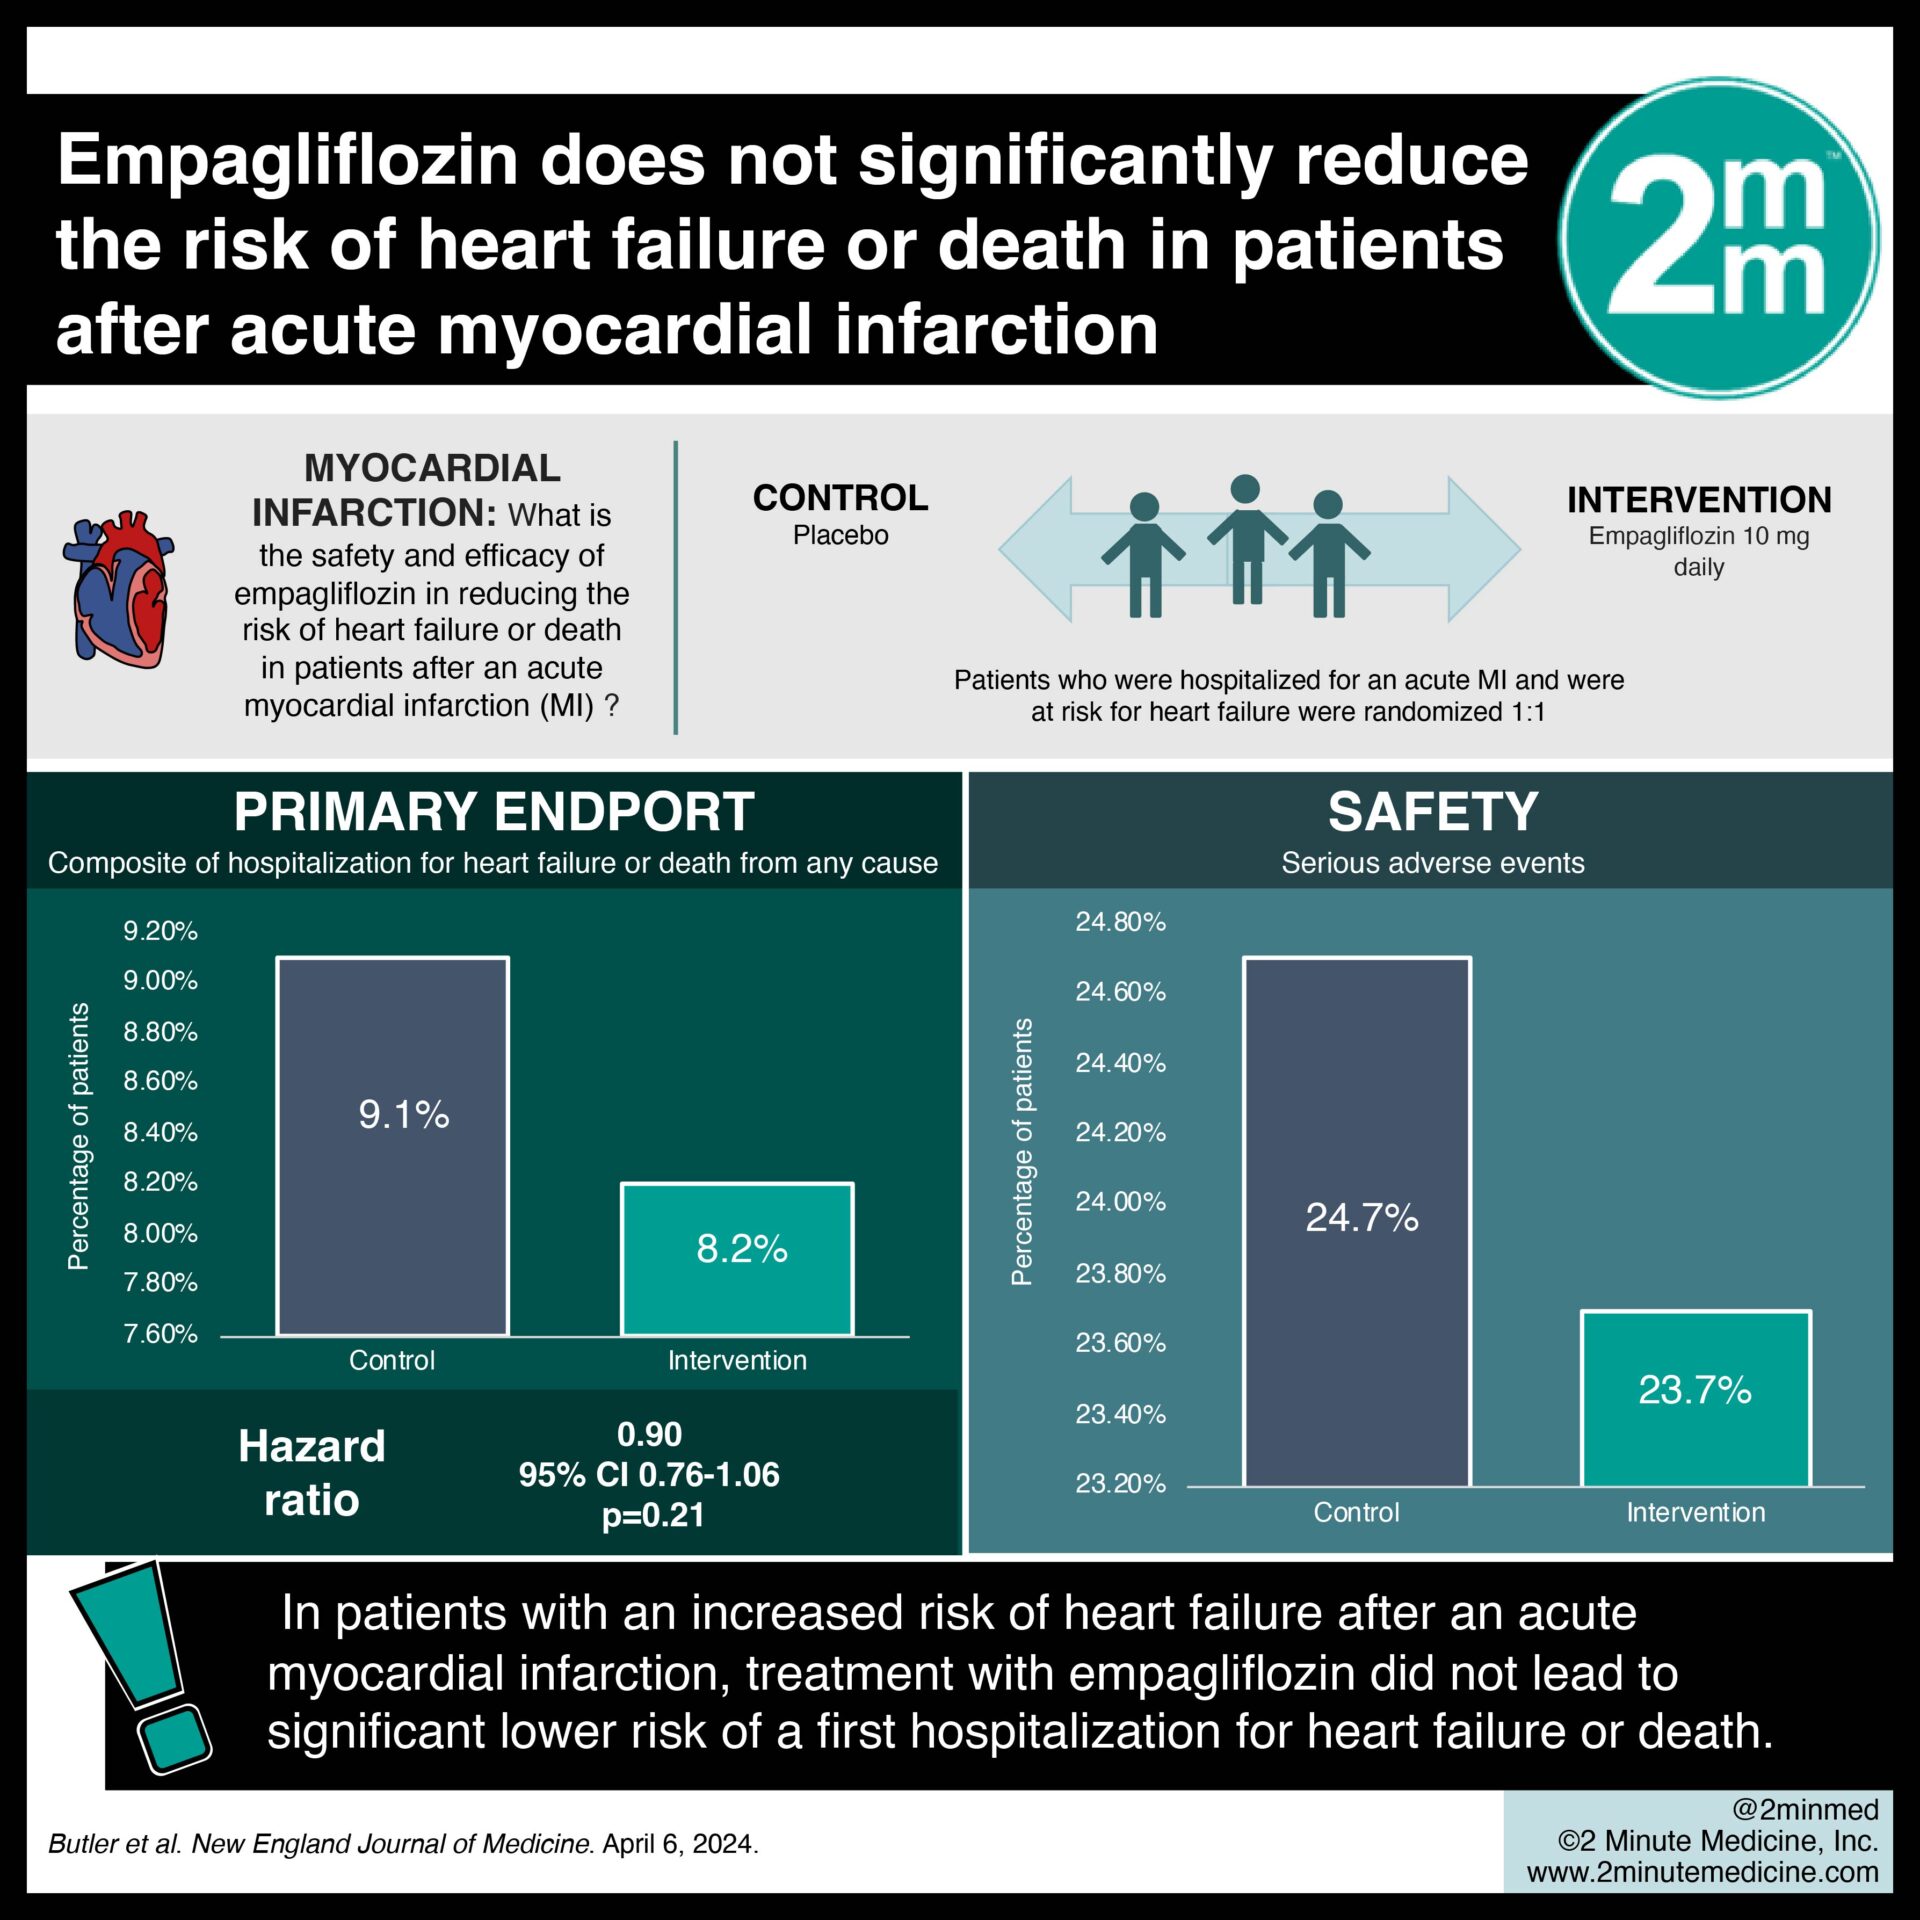 #VisualAbstract: Empagliflozin does not significantly reduce the risk of heart failure or death in patients after acute myocardial infarction